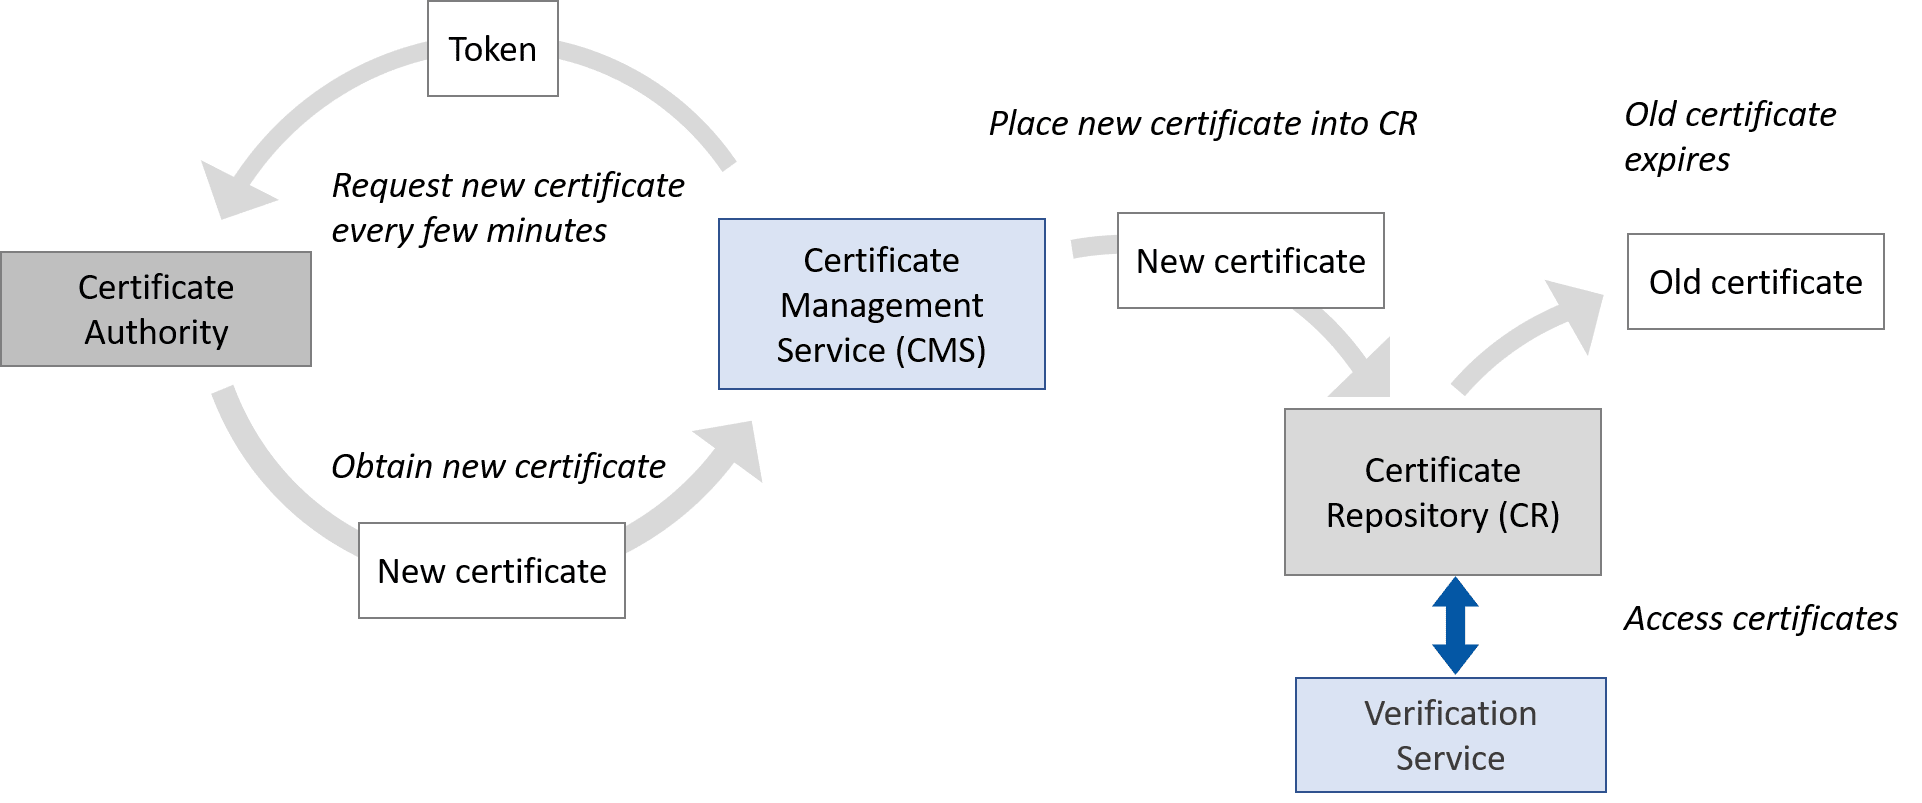 CMS requests new certificates every few minutes